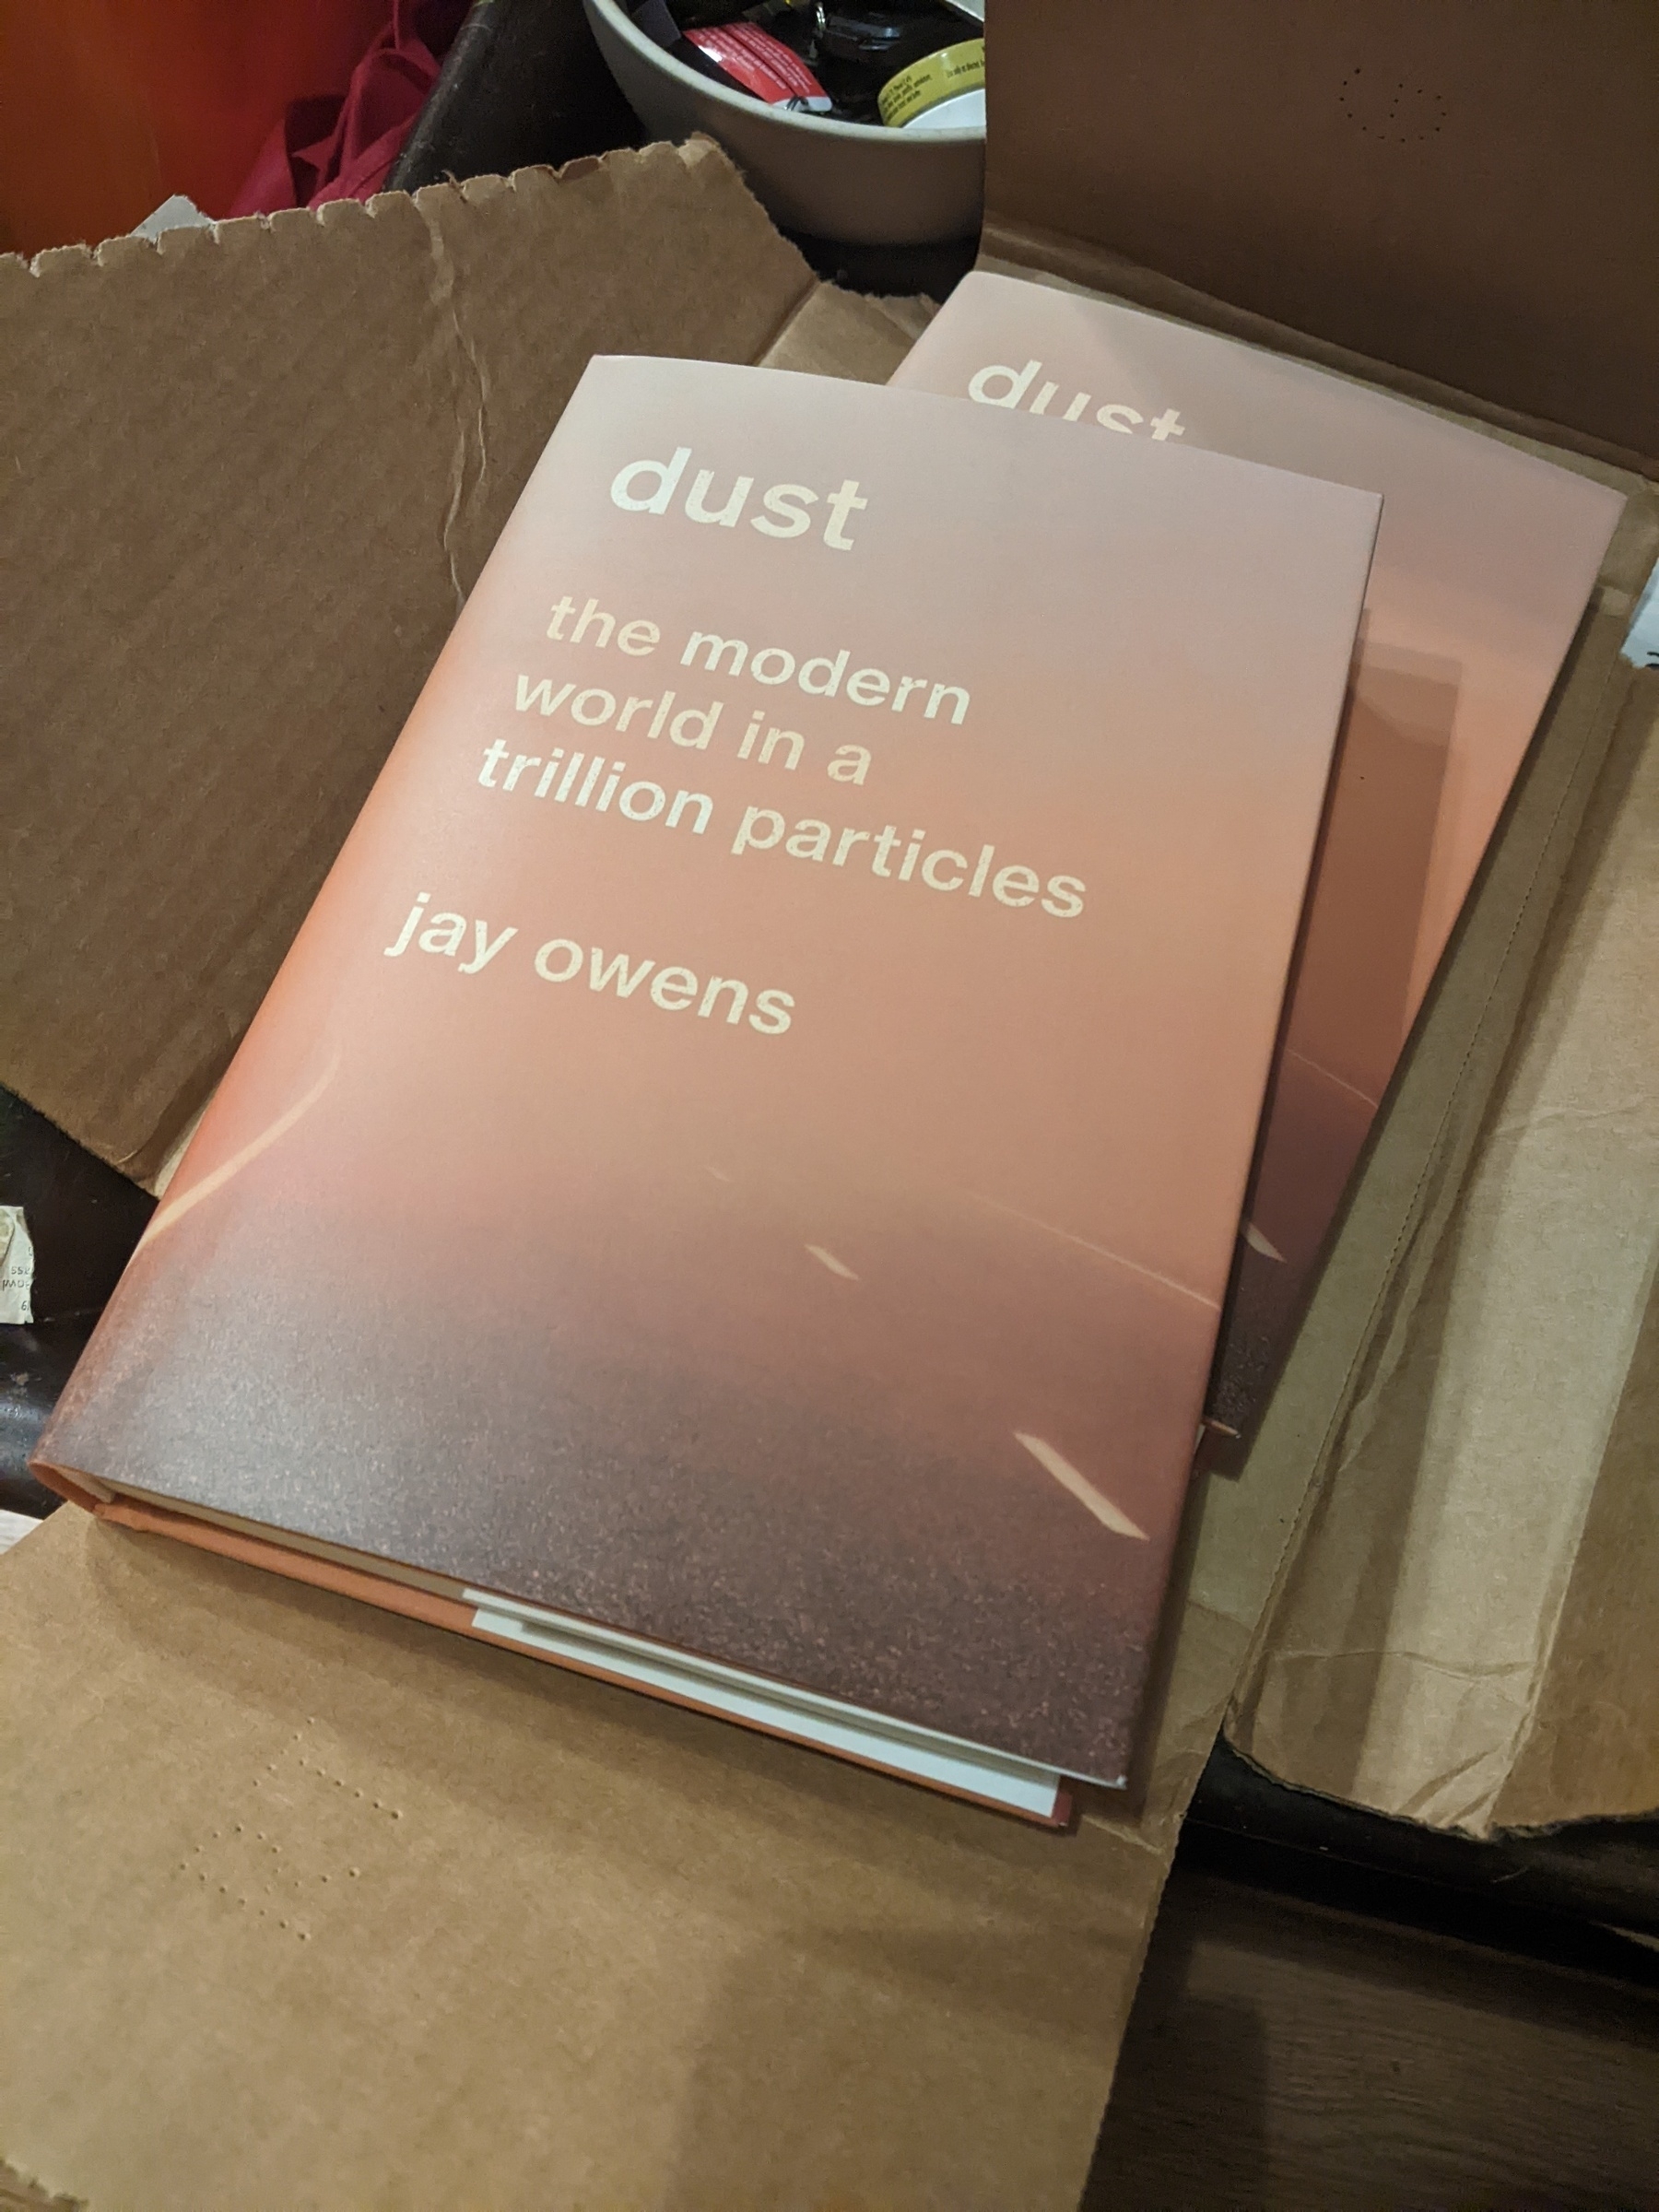 Two copies of the book "dust: the modern world in a trillion particles" by Jay Owens stacked on an open cardboard packing sleeve 